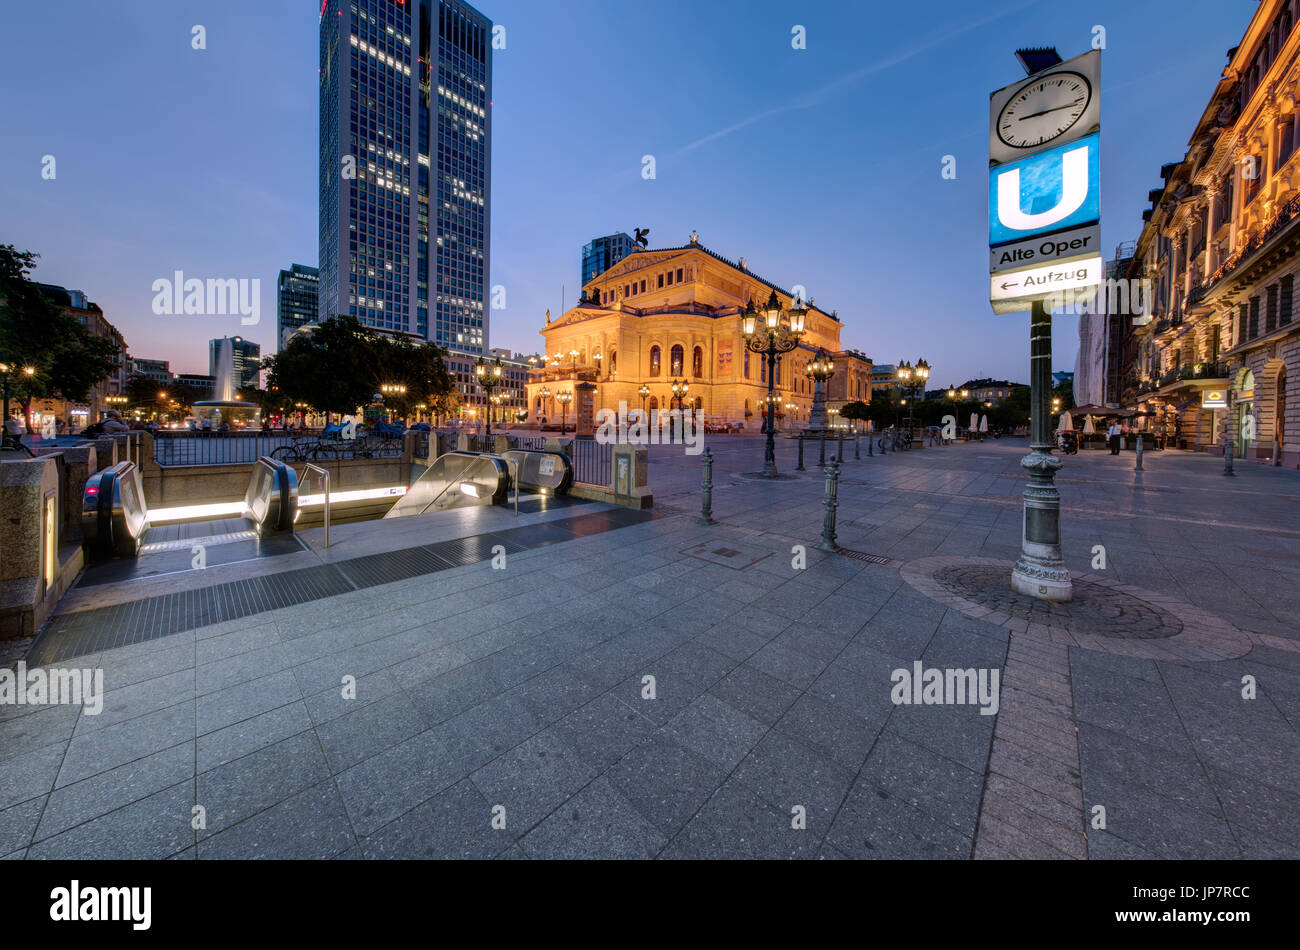 Opernplatz in central Frankfurt with the Alte Oper (Old Opera House) in the background. Stock Photo